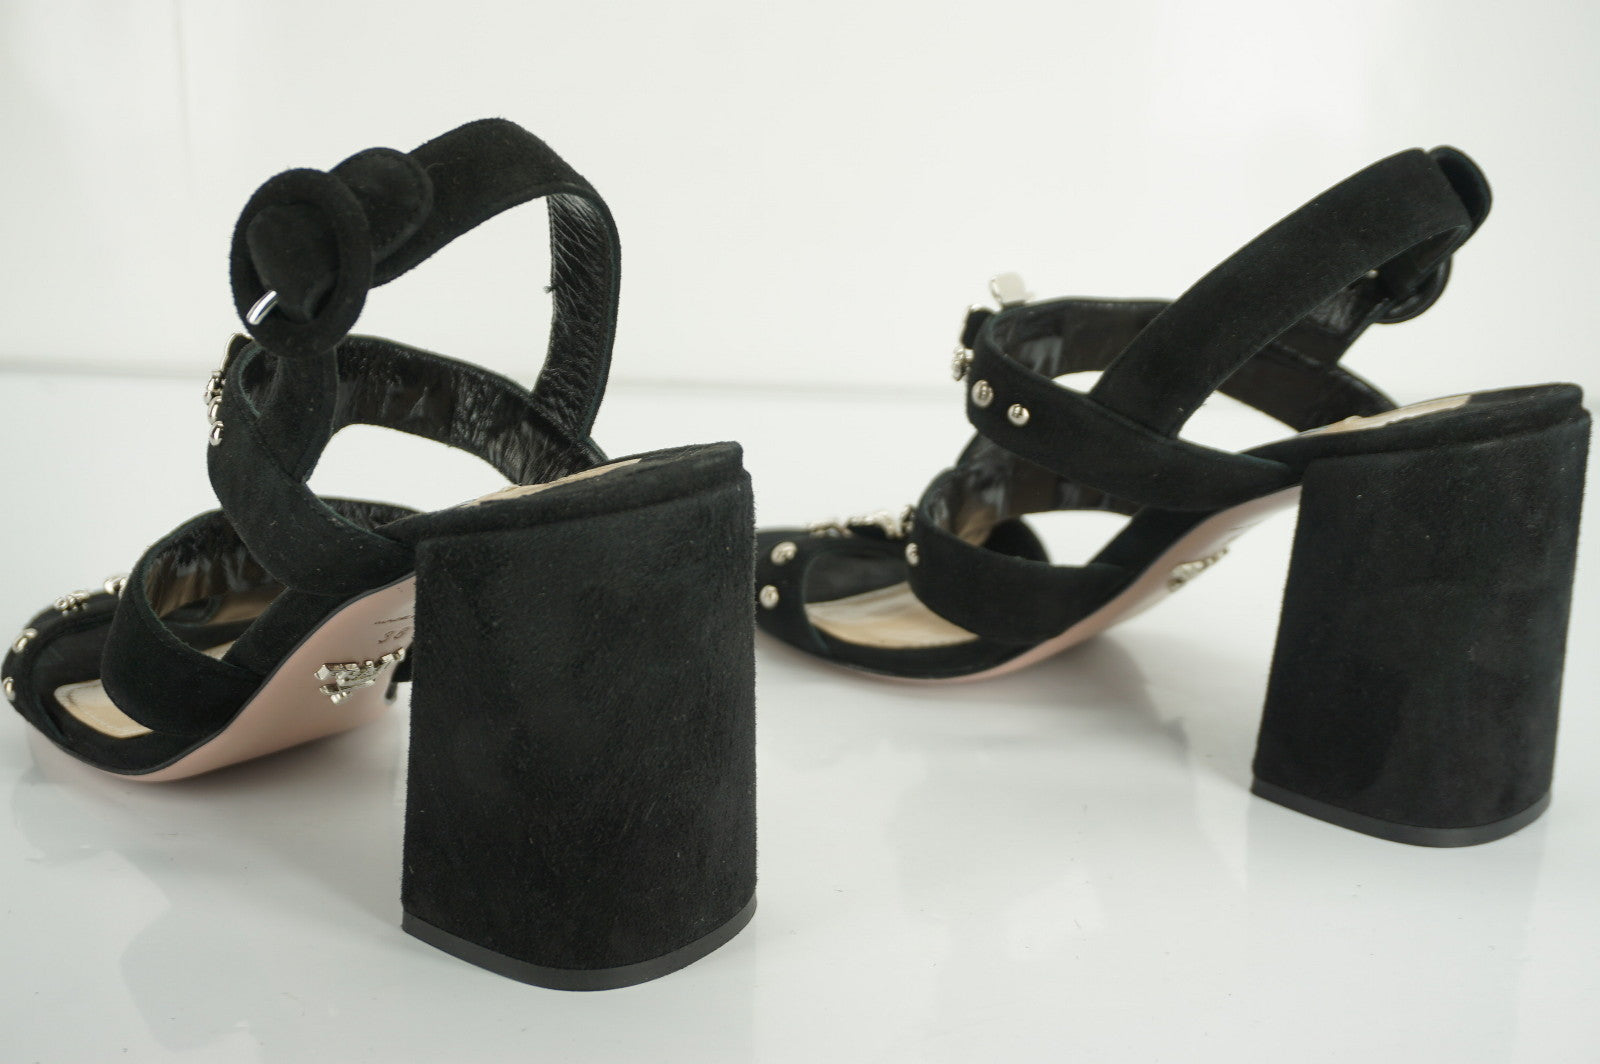 Prada Black Suede Silver Flower Studded Caged Strappy Sandals Size 38 $750 New